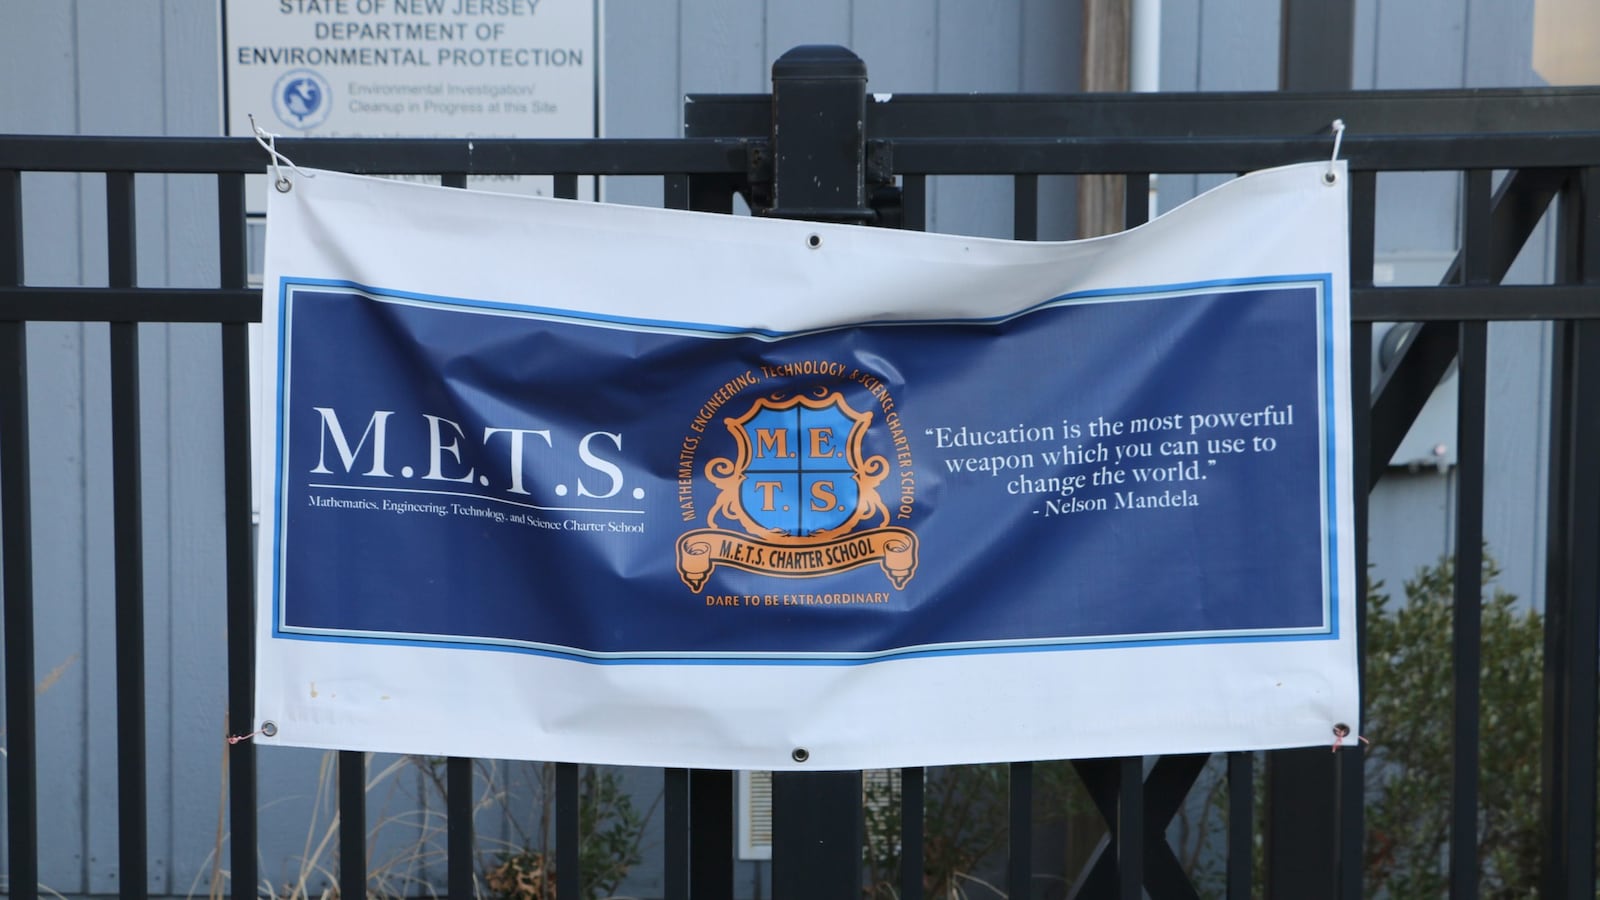 M.E.T.S. Charter School, which has schools in Jersey City and Newark (pictured), faced multiple state investigations and struggled for years with leadership instability, low academic achievement, and enrollment challenges before the state decided to close the school this month.